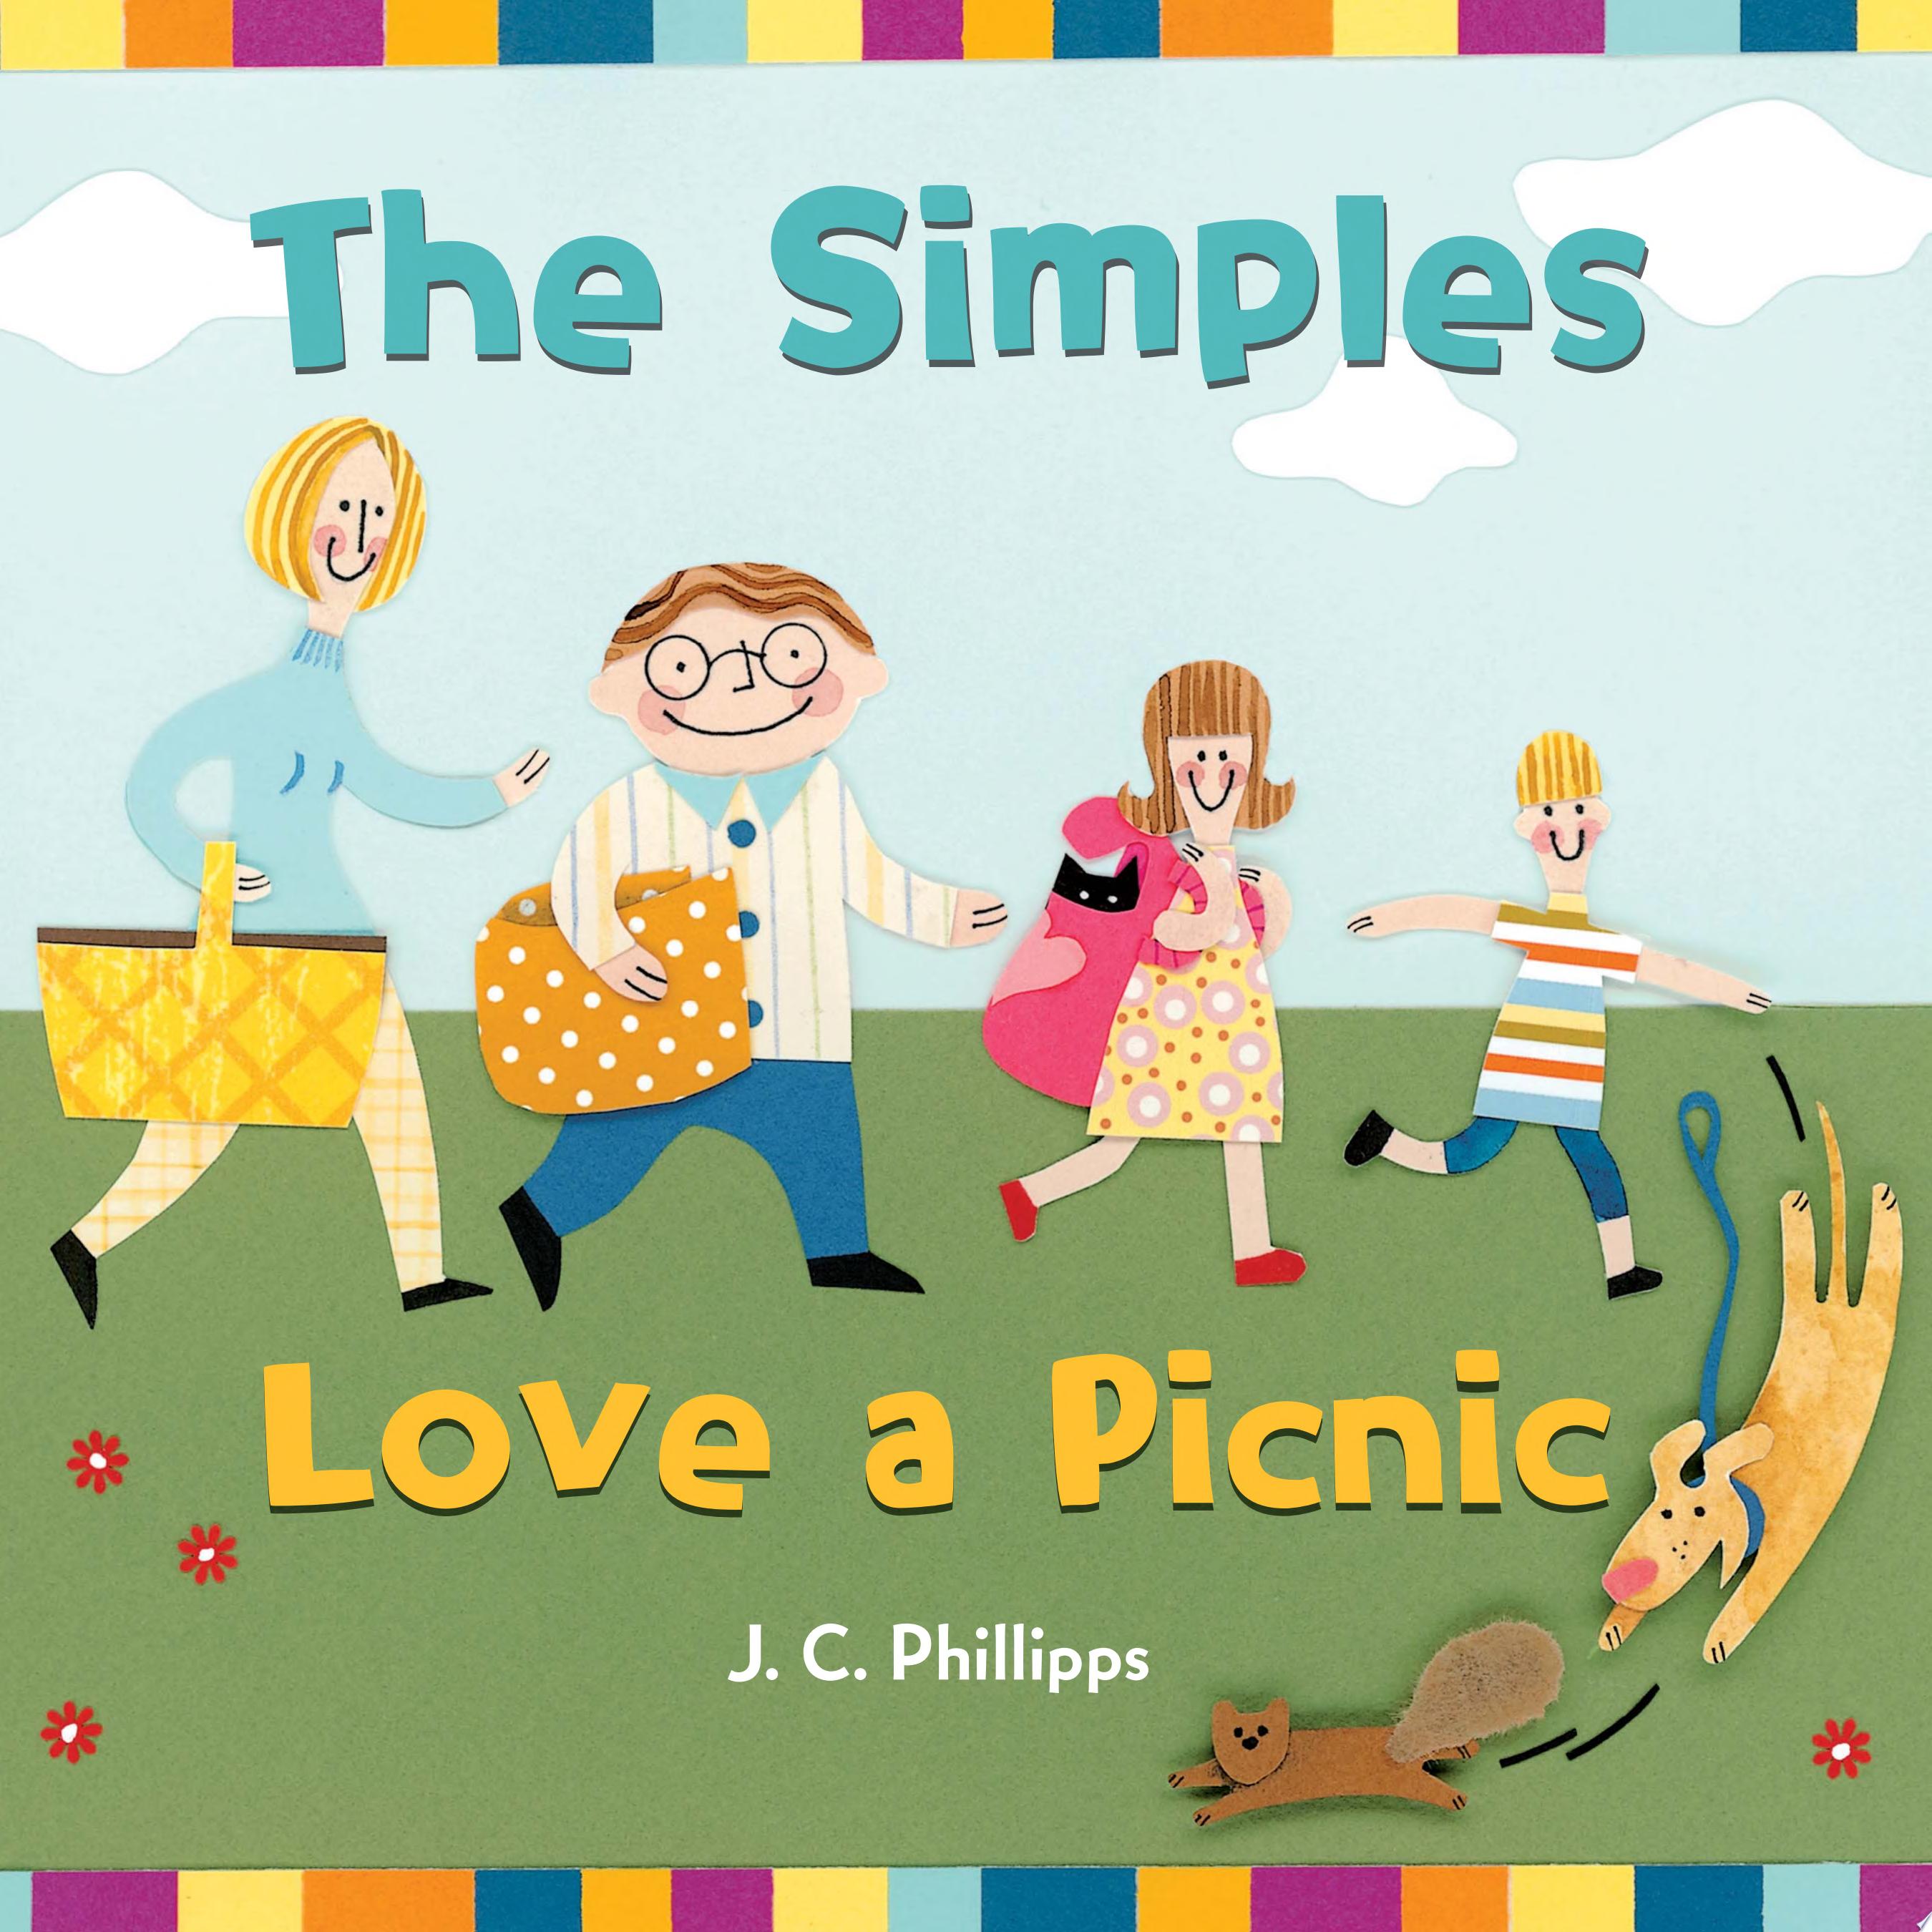 Image for "The Simples Love a Picnic"